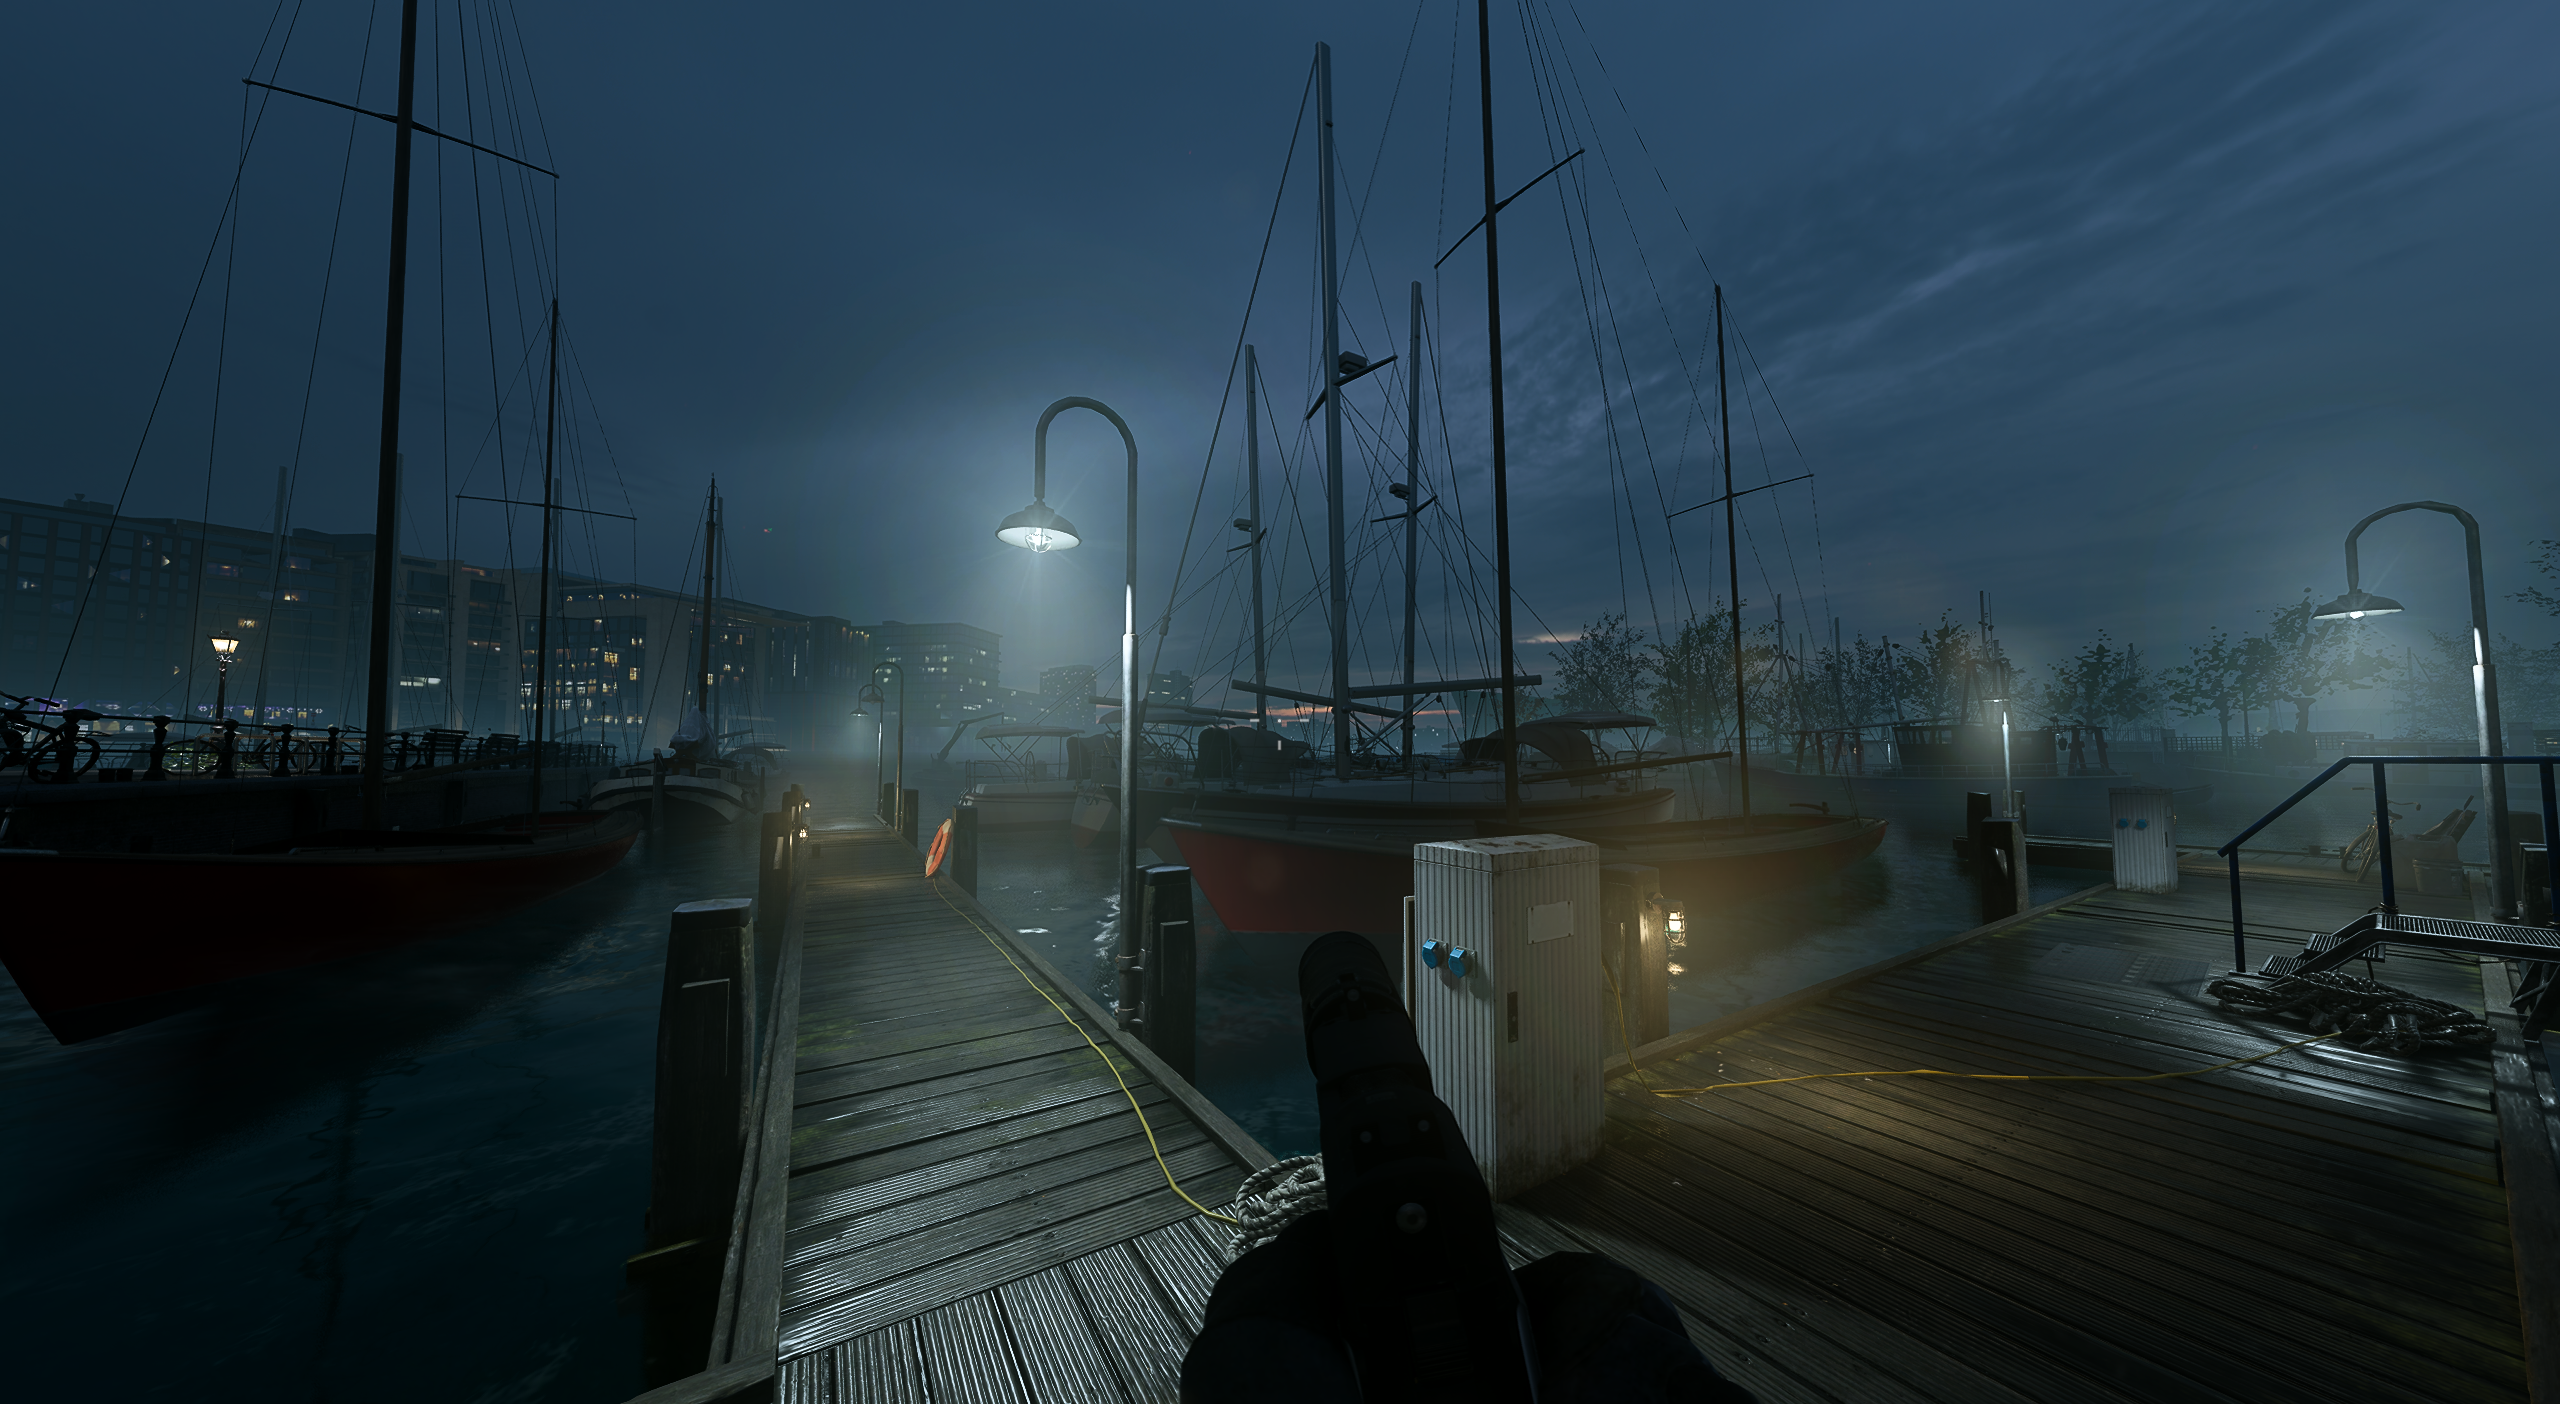 View of player creeping around a foggy mariner